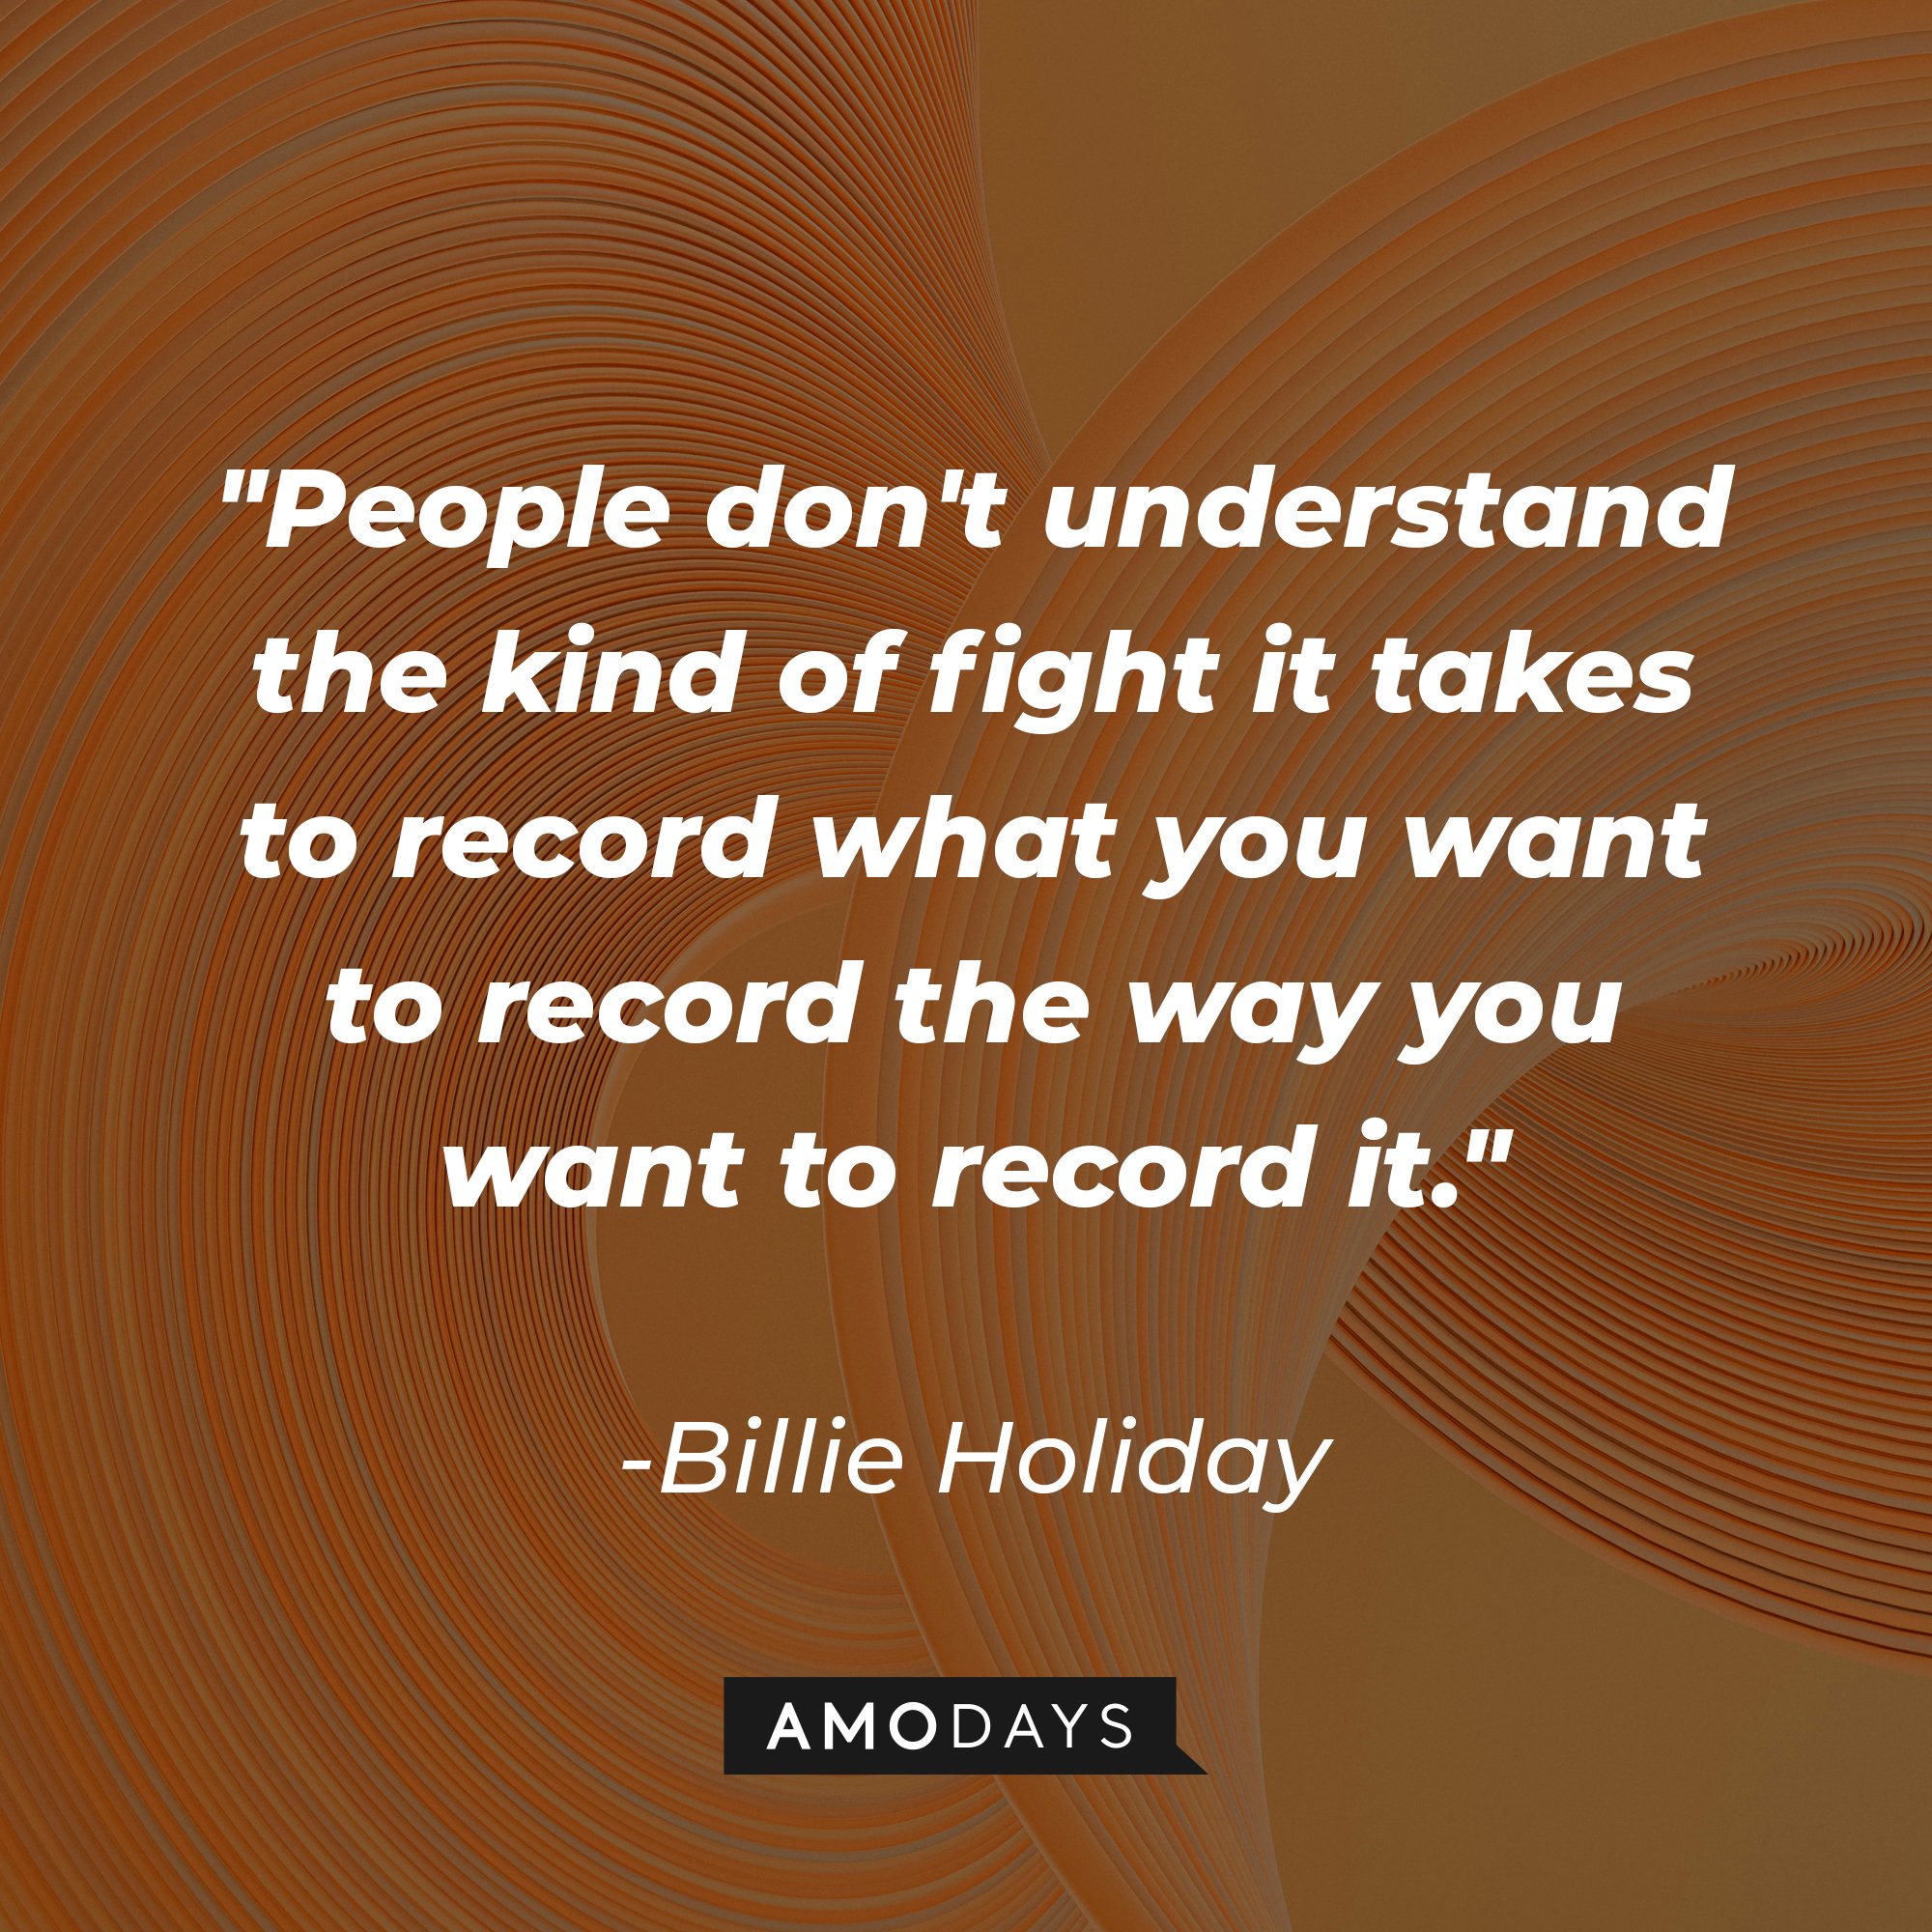 Billie Holiday's quote "People don't understand the kind of fight it takes to record what you want to record the way you want to record it." | Source: Unsplash